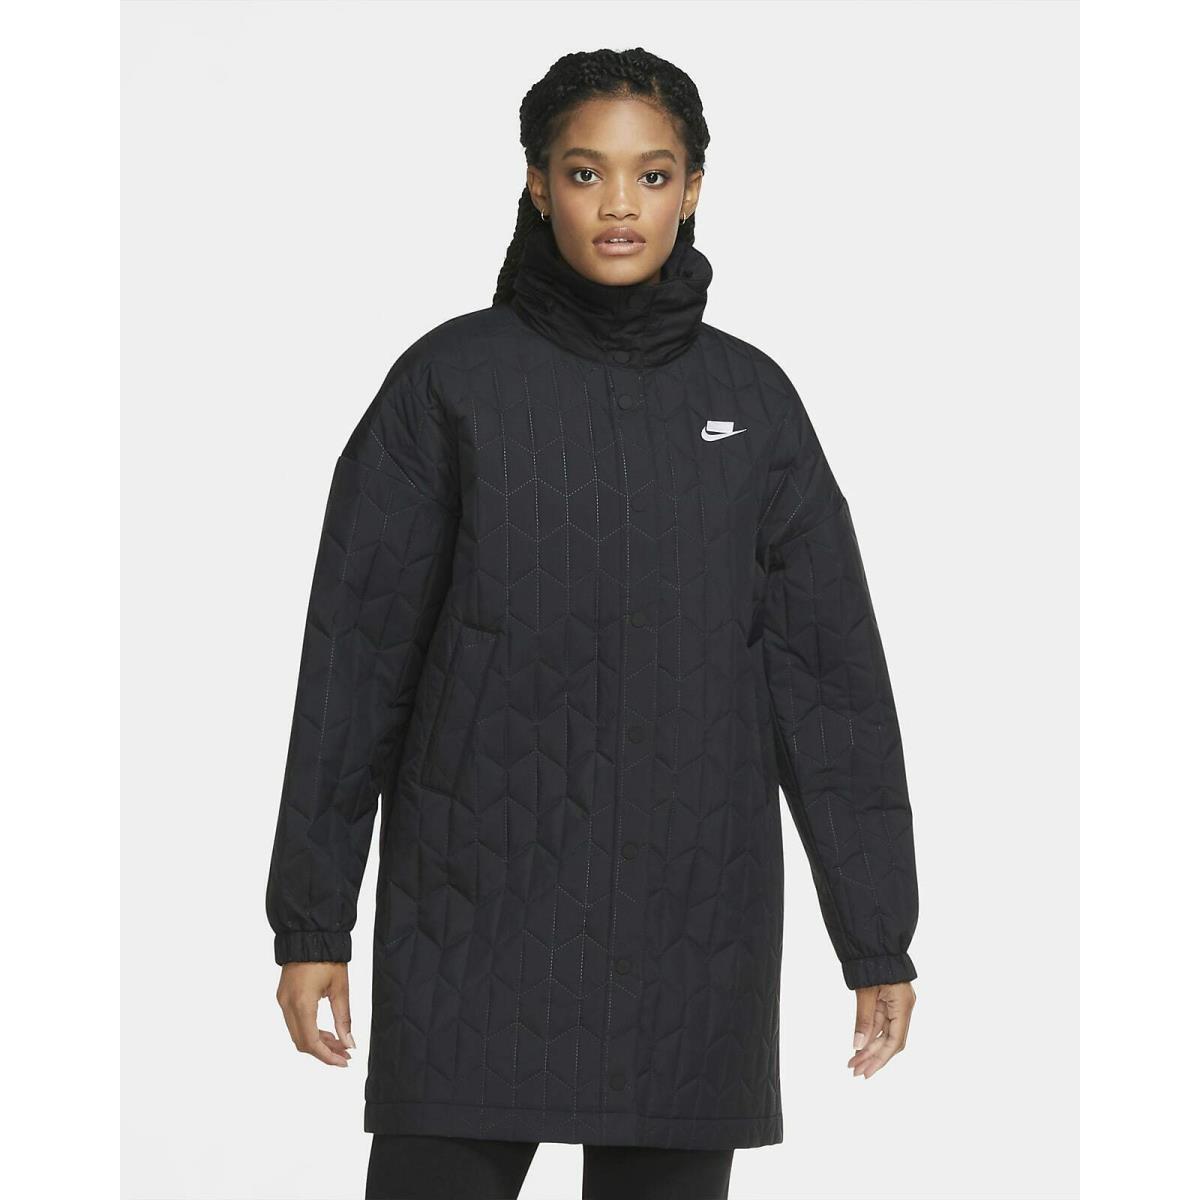 Nike Sportswear Quilted Jacket Size Small Womens Black Parka CU6691 010 Rare